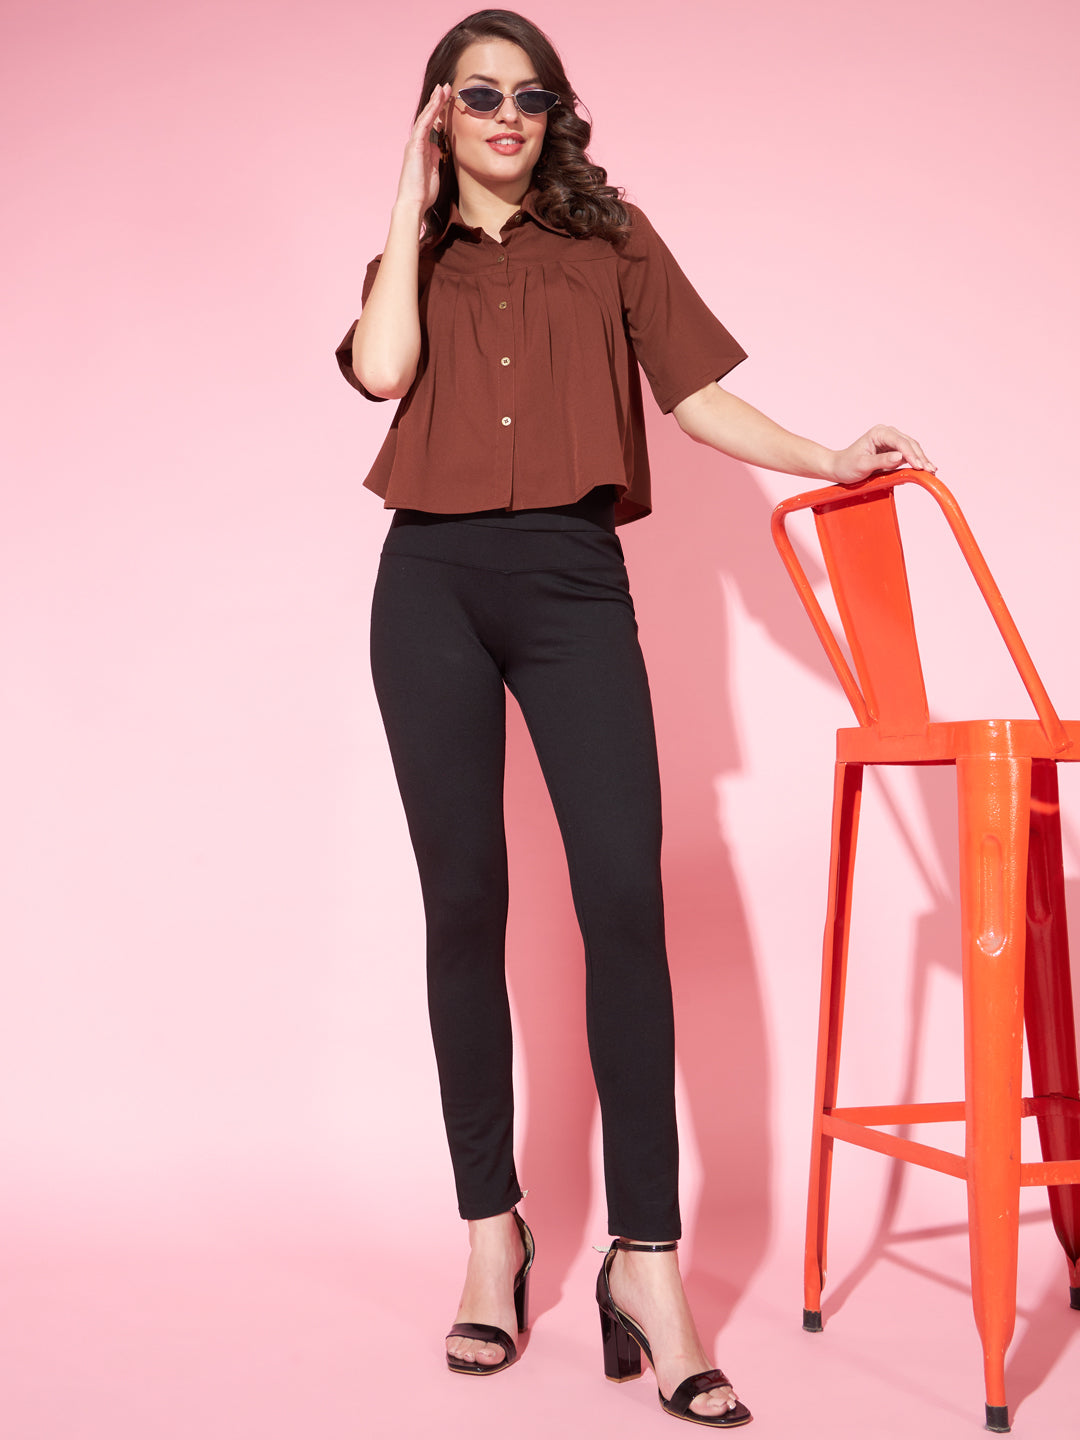 Slenor Women Solid Party Brown Shirt